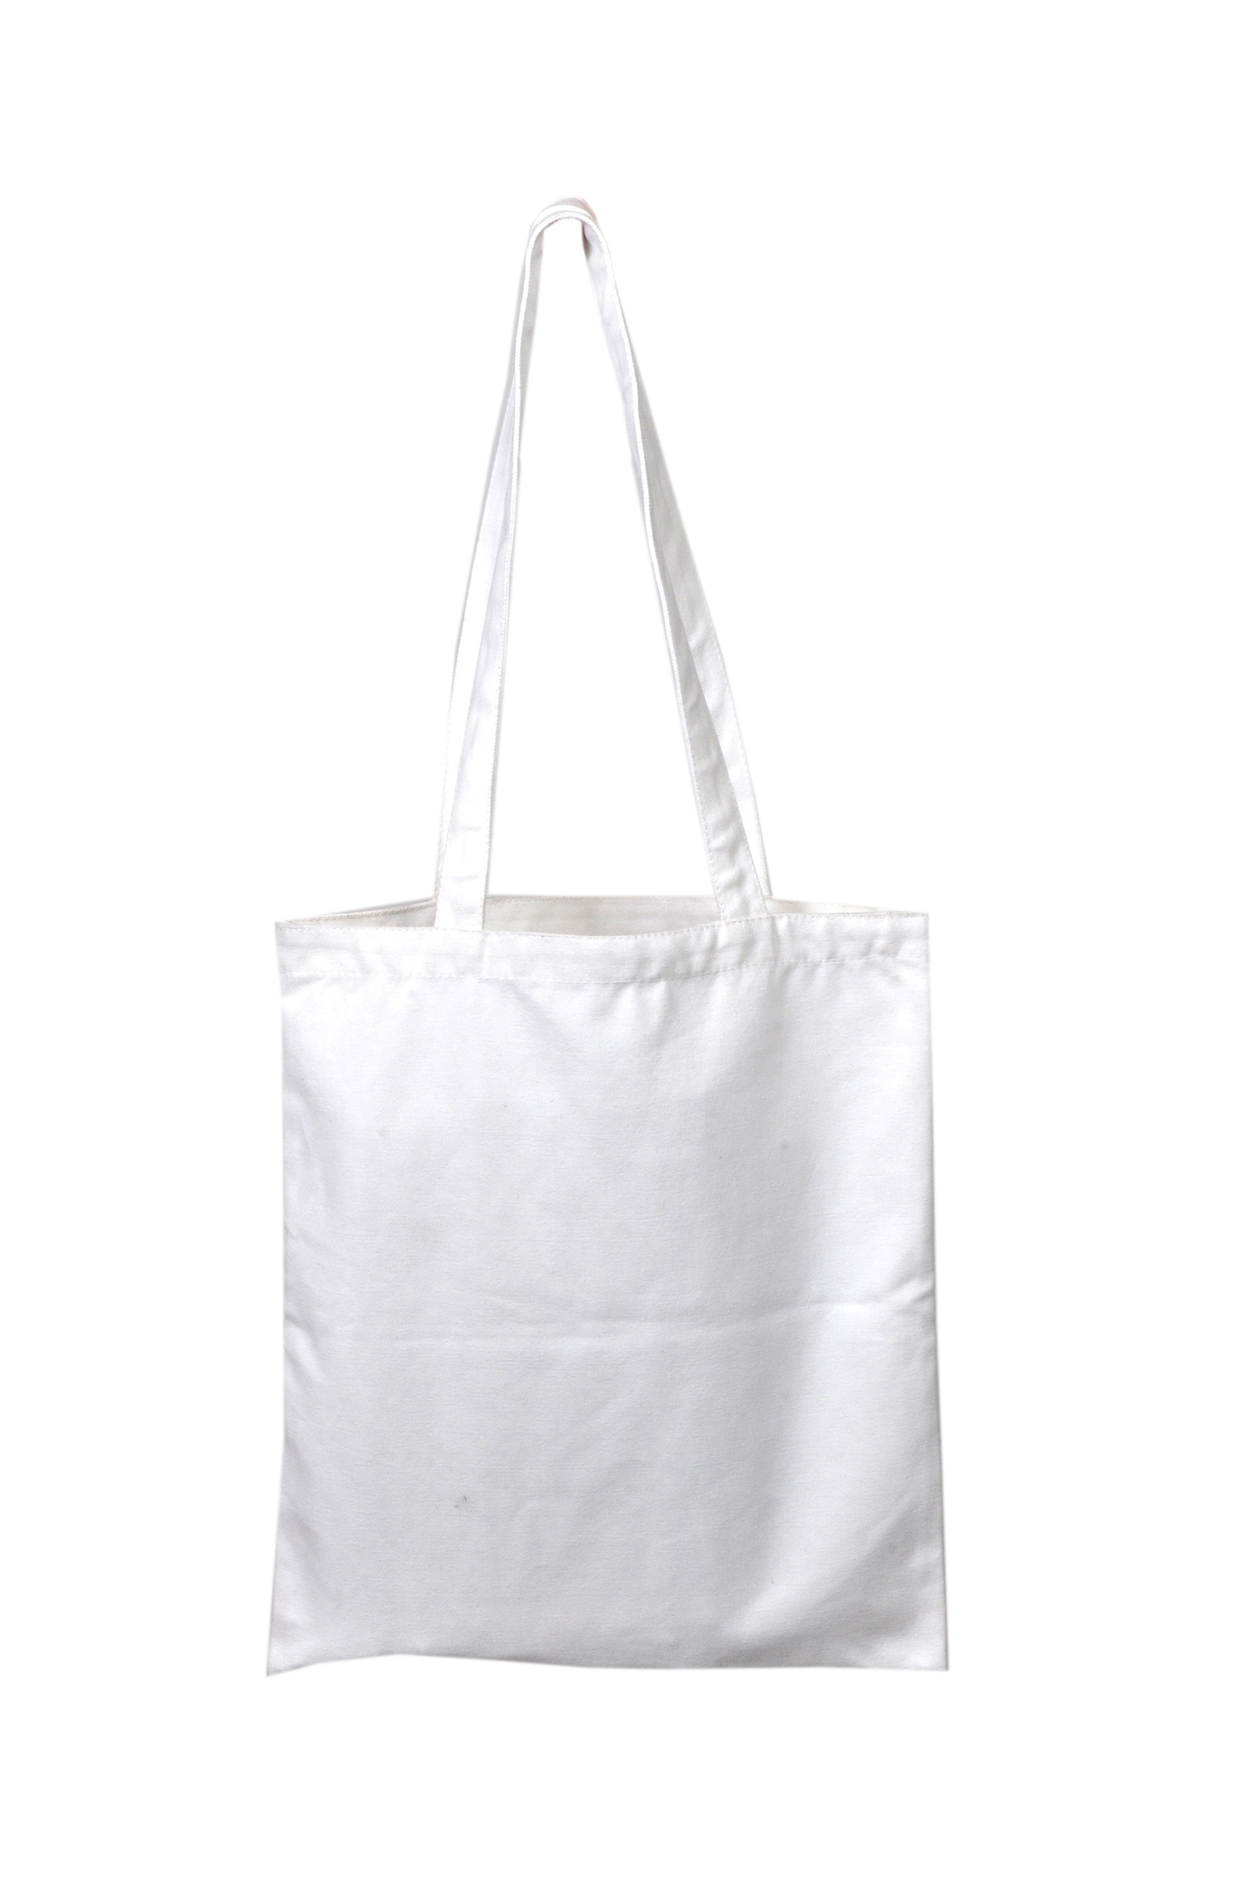 Buy Maheshwari Plain Cotton Reusable Shopper Tote Bag (Pack of 5) 15x18  inches with Zipper Closer, Cloth Bags for Shopping, Plain Tote Bag for  Painting at Amazon.in